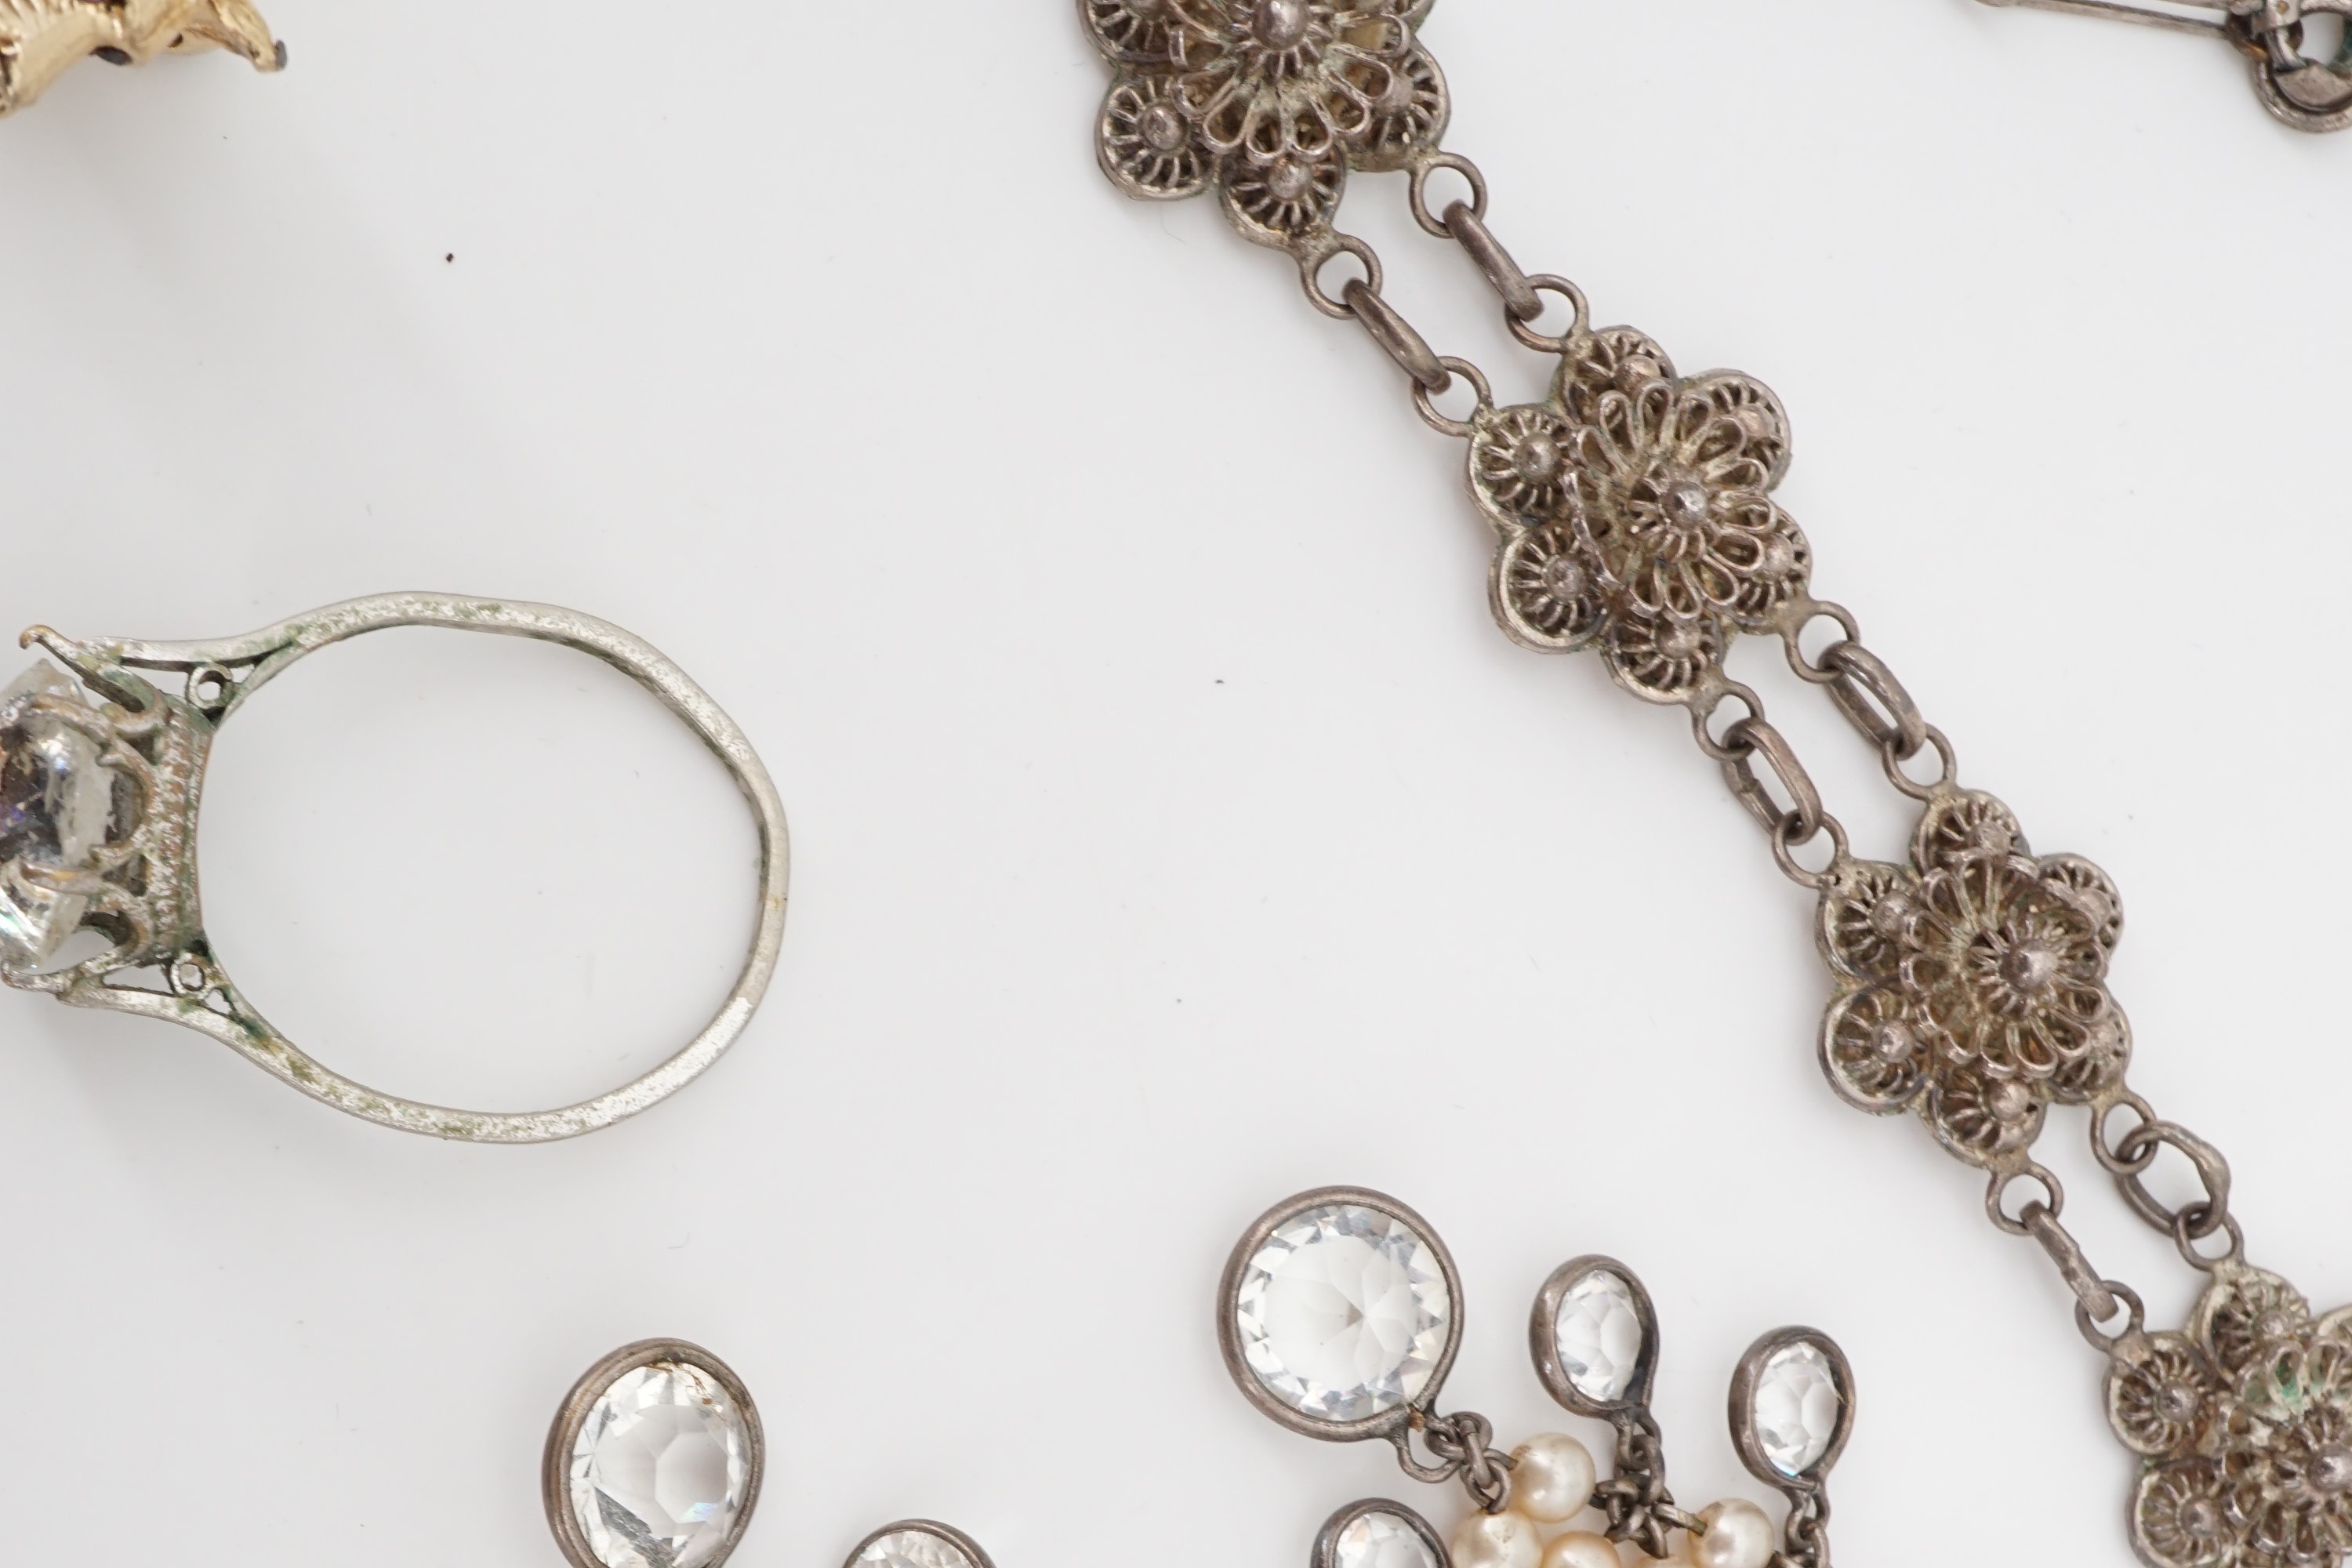 Vintage costume jewellery, including paste ear pendants, brooches, a white metal filigree - Image 5 of 5